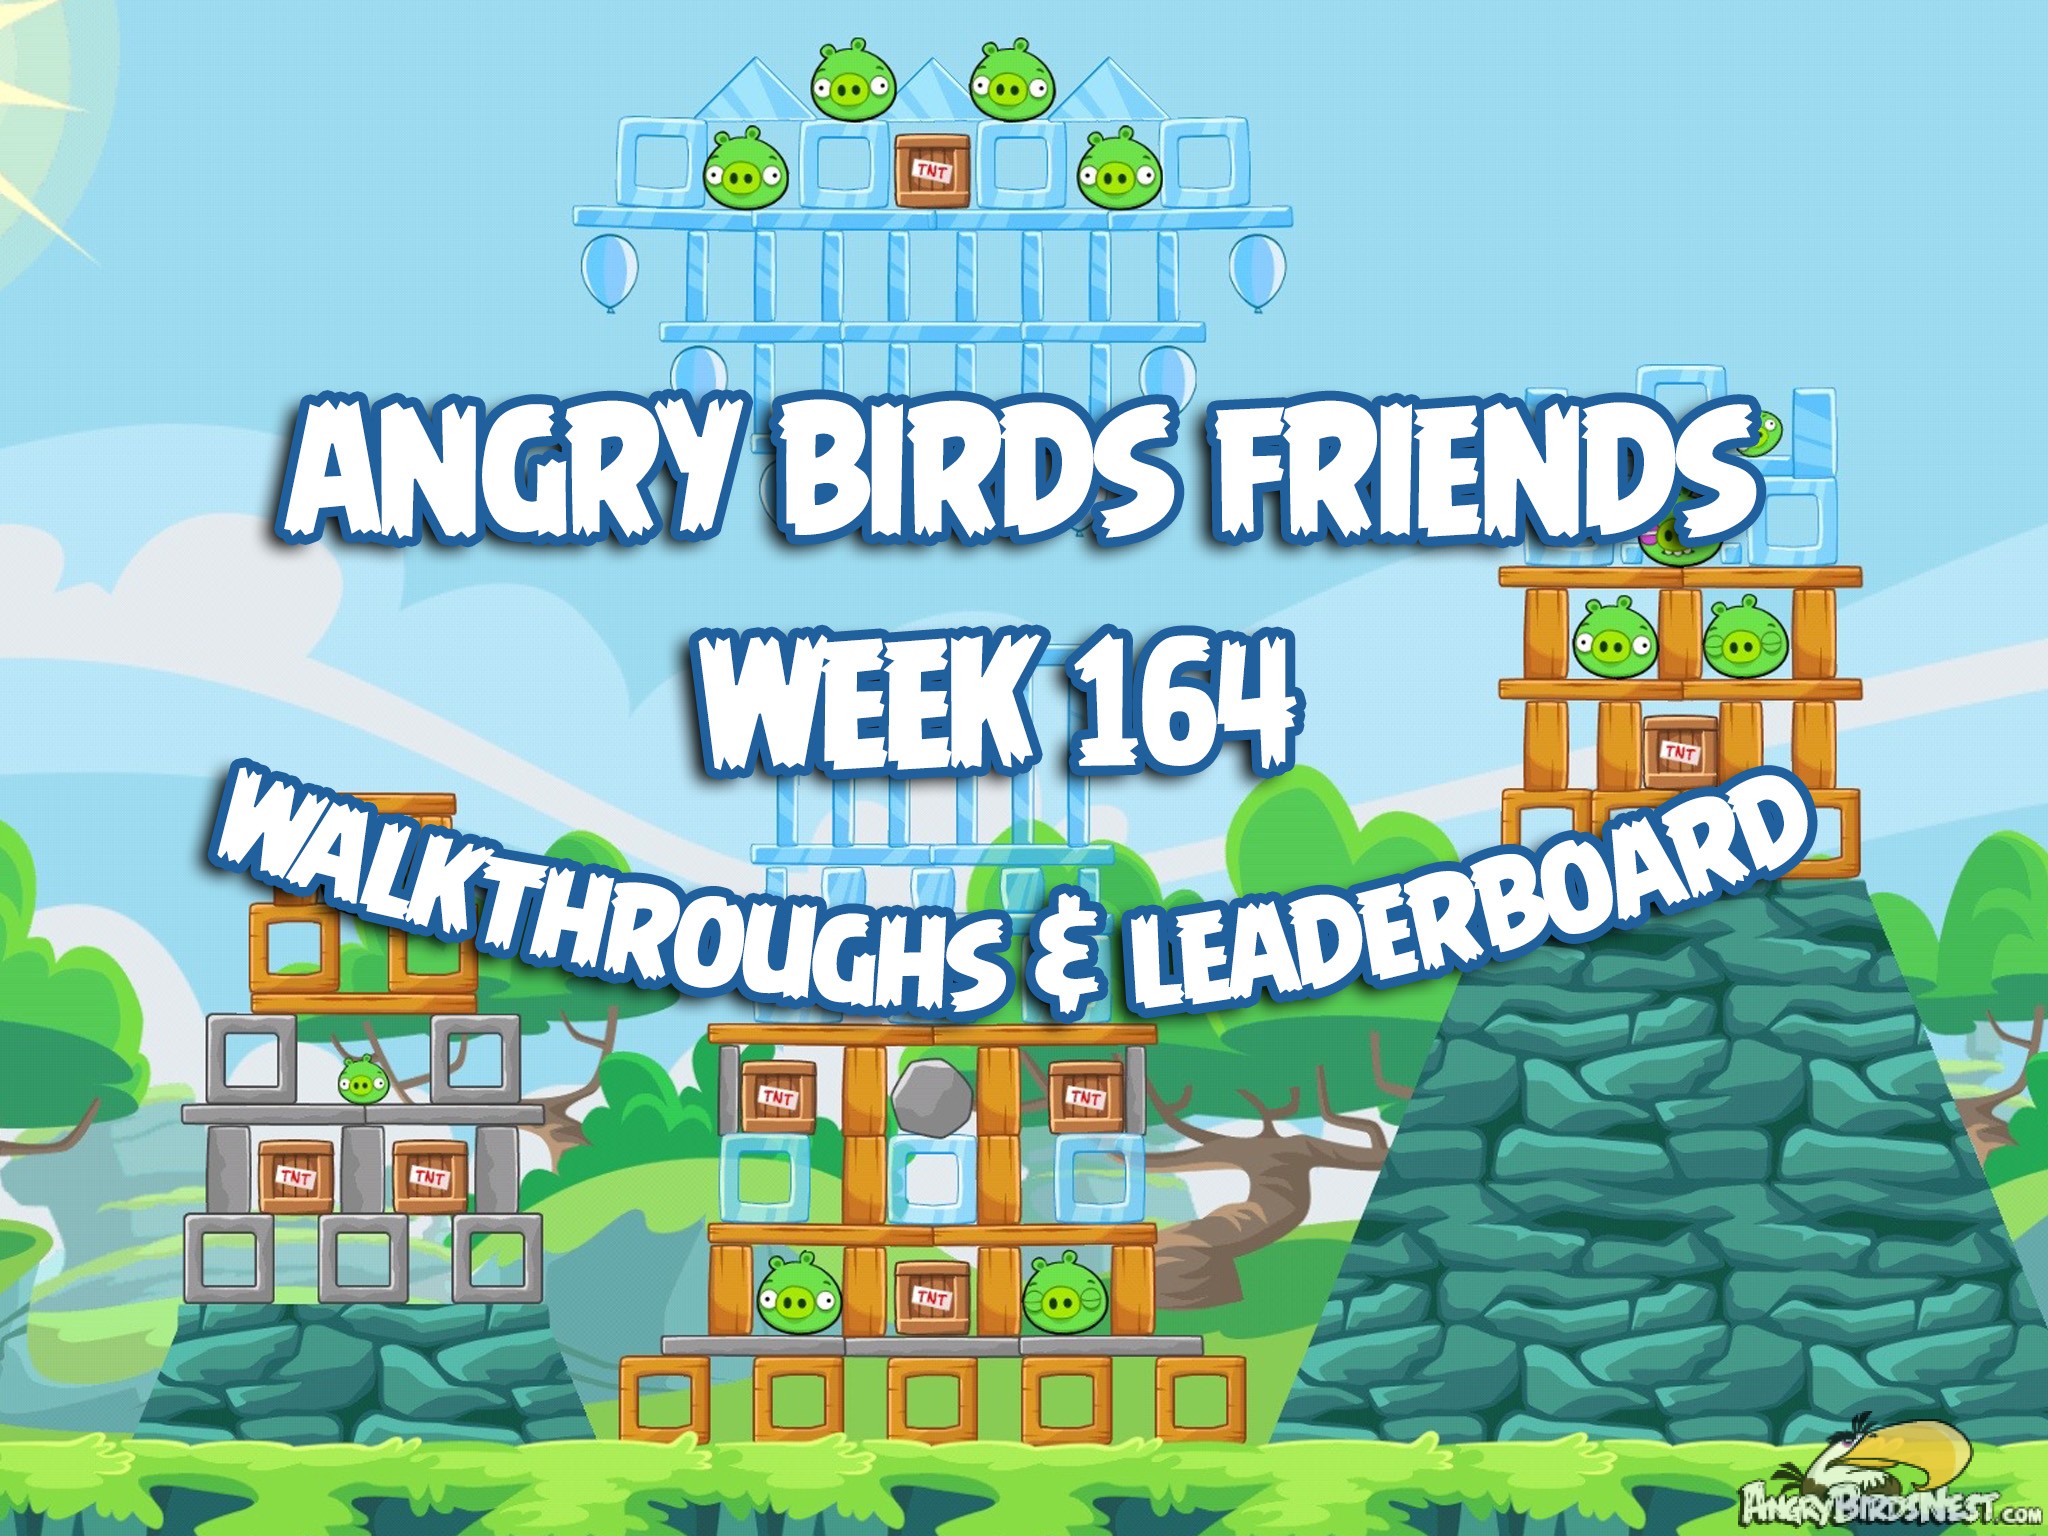 Angry Birds Friends Tournament Week 164 Feature Image